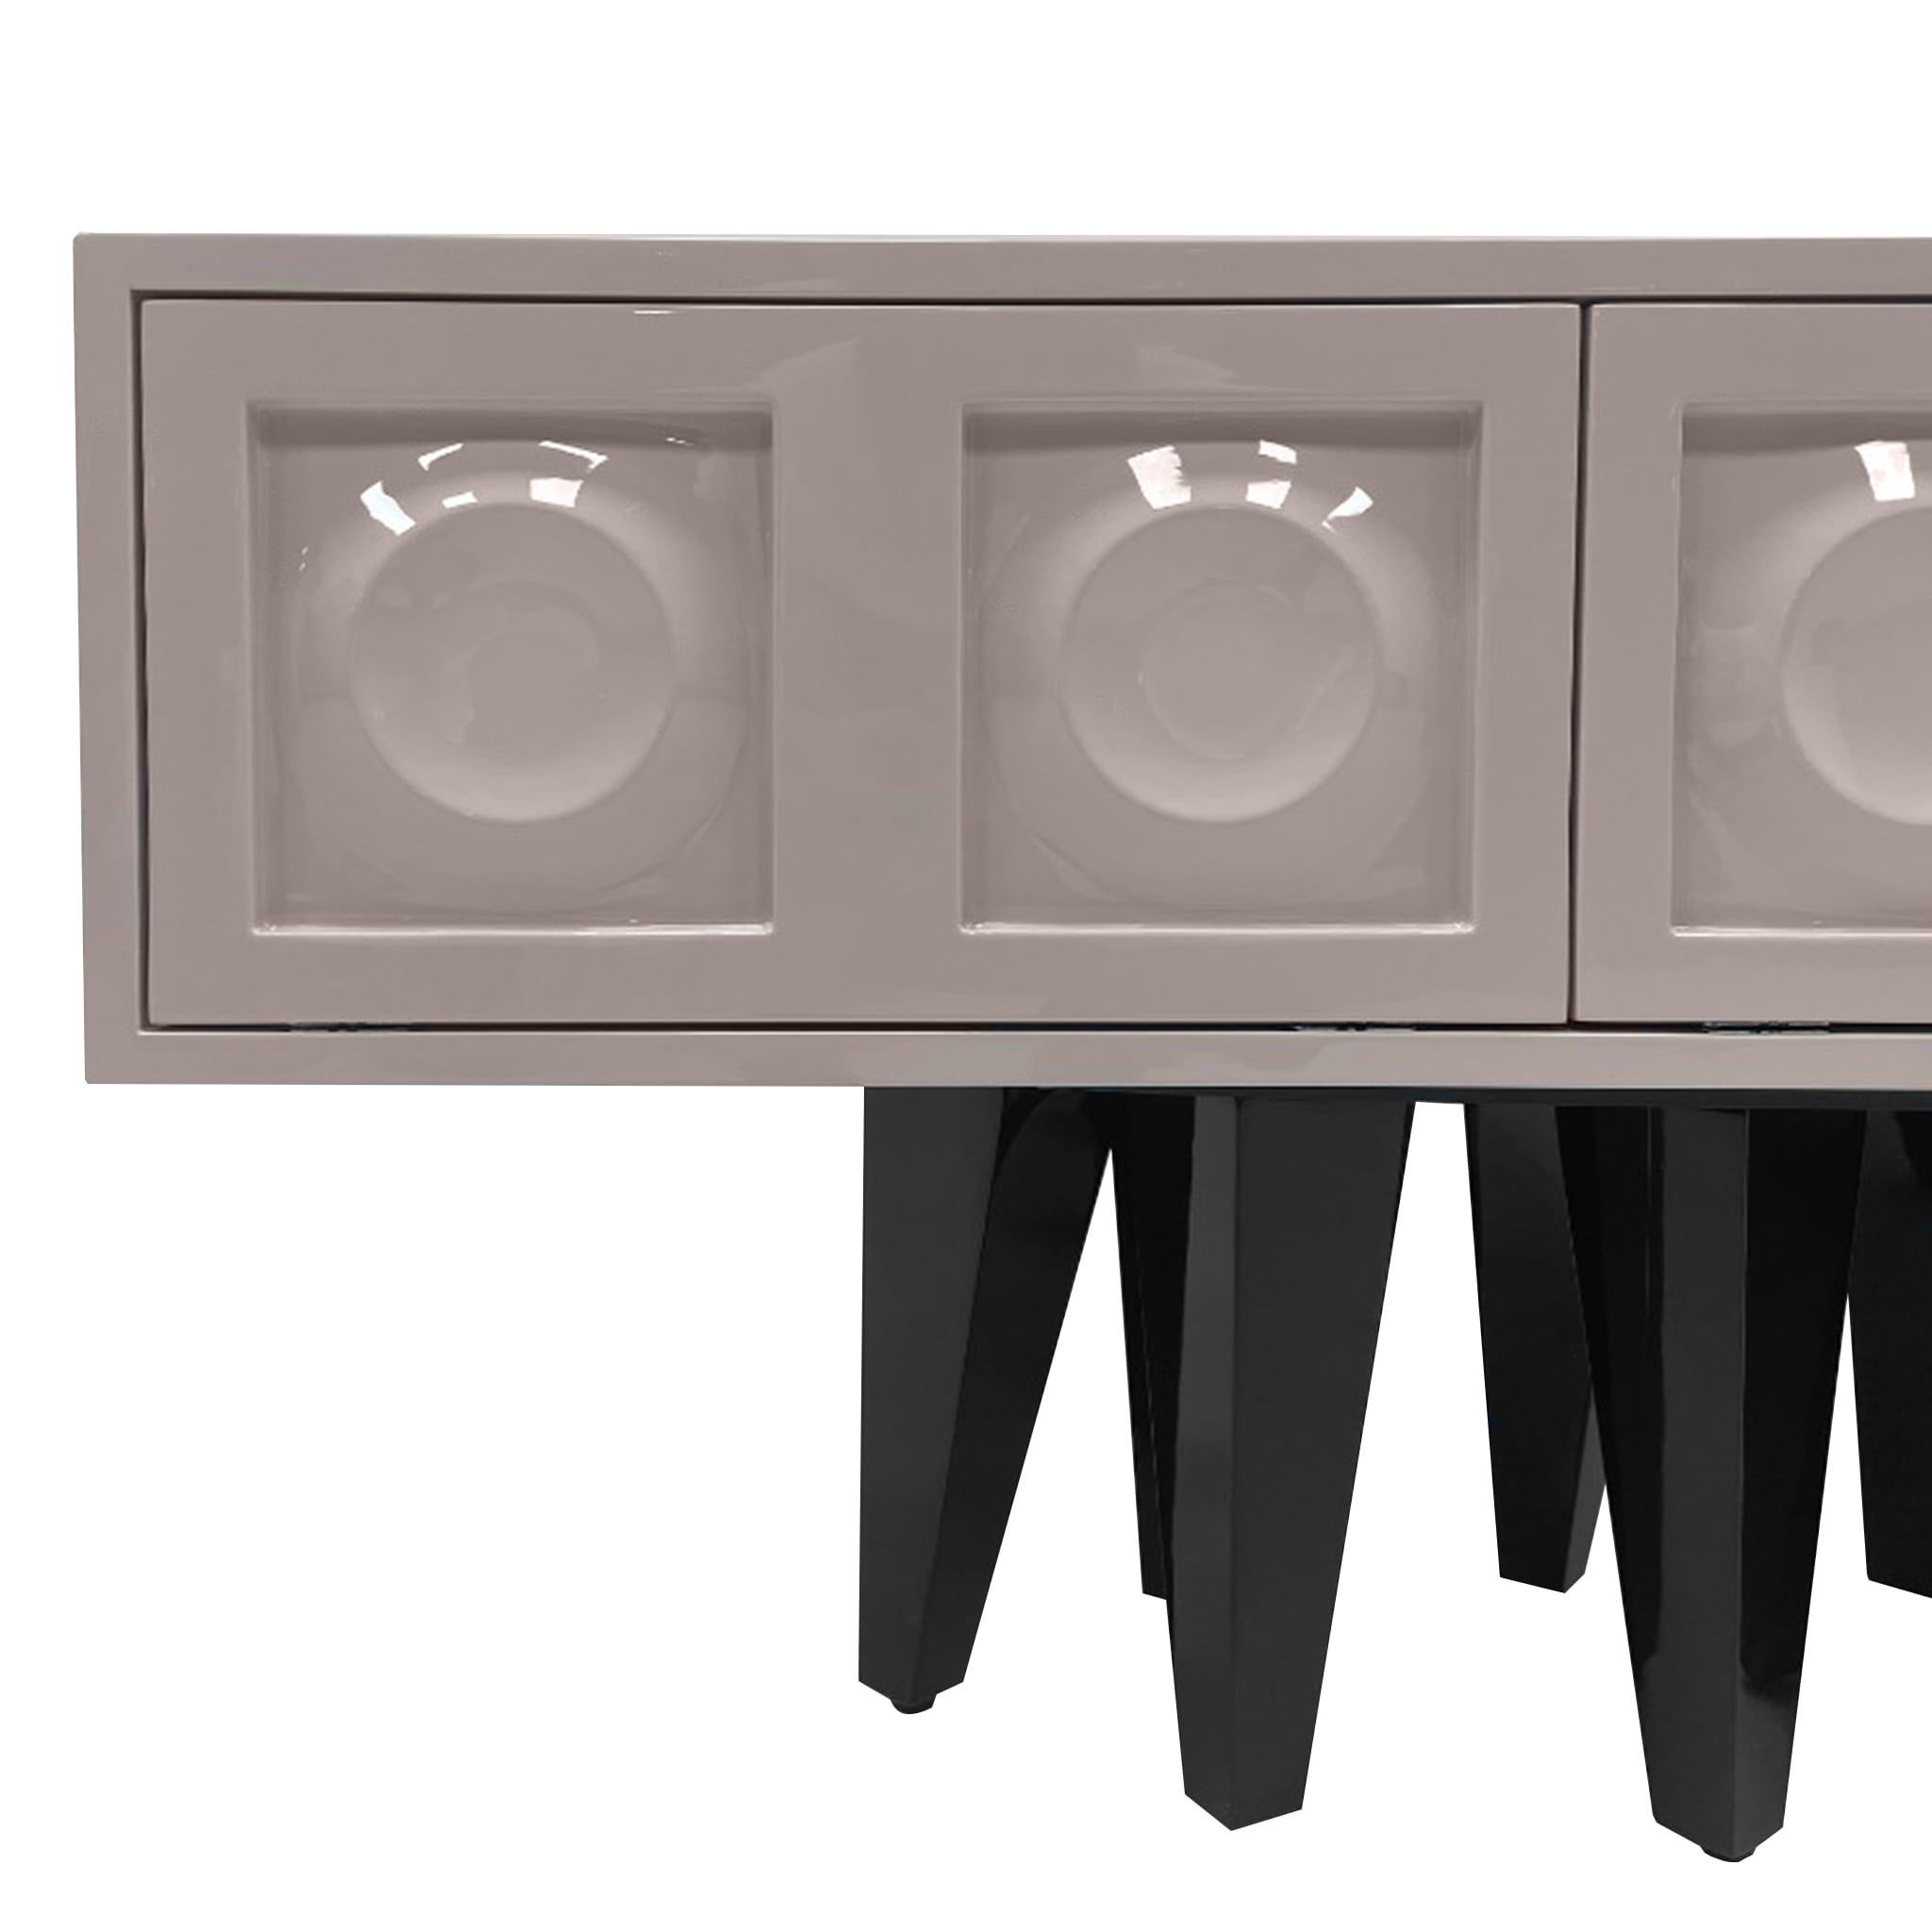 Burton TV Stand is an outstanding modern design style that combines bold shapes and materials. Now that you have seen it, you won't forget it. BurtonTV Stand has an iconic visual aesthetic. Surrealist like a dream, elegant like Art Deco, and